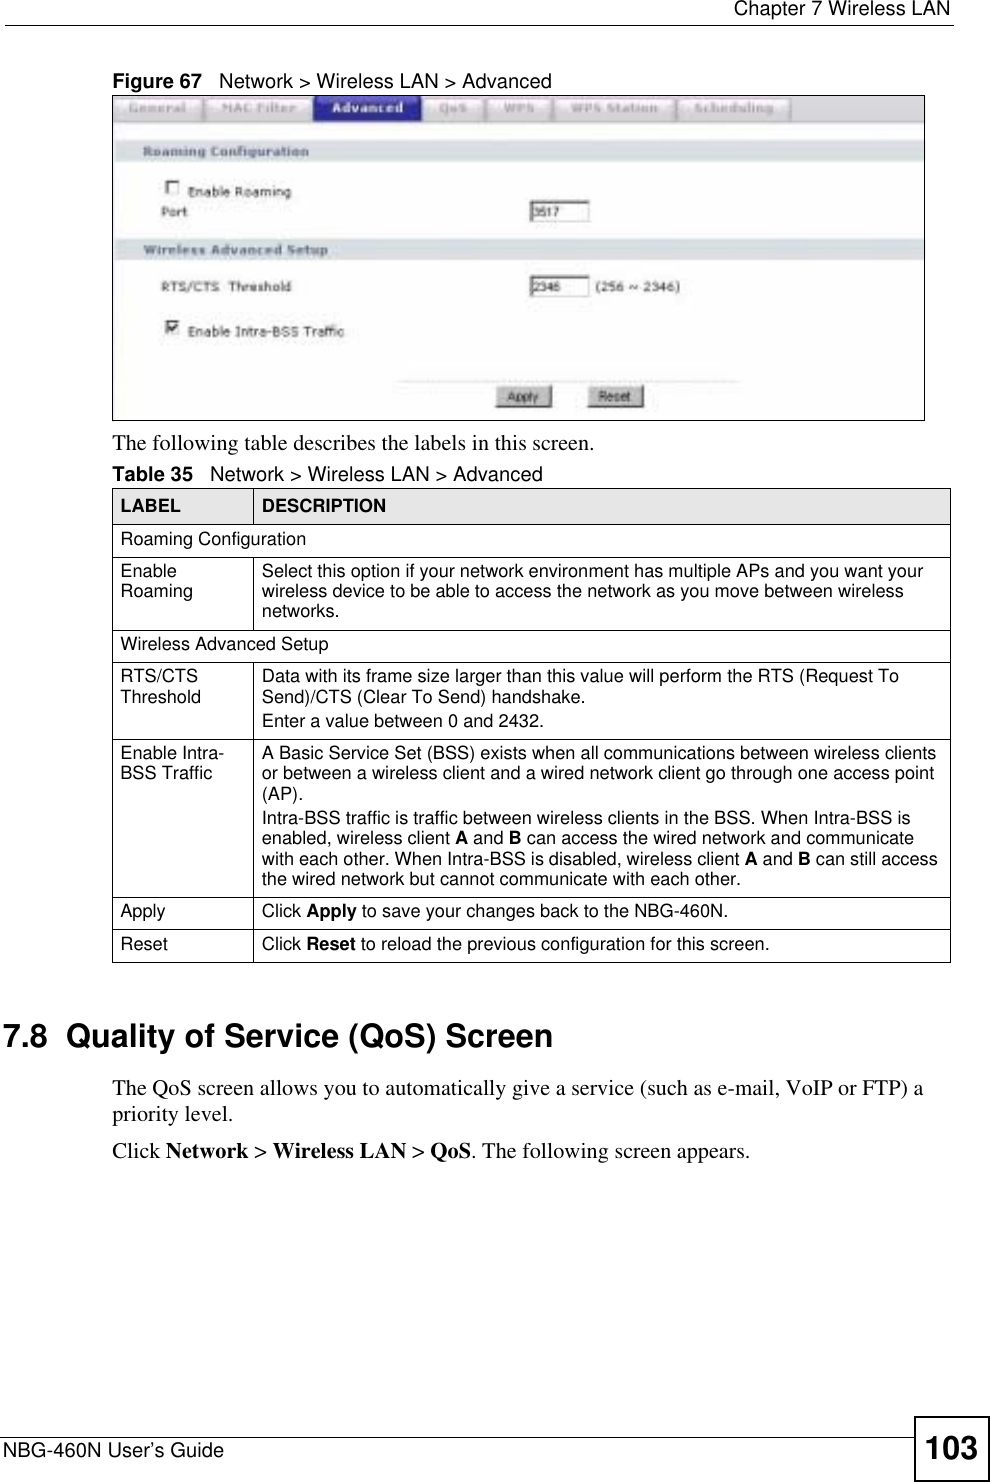  Chapter 7 Wireless LANNBG-460N User’s Guide 103Figure 67   Network &gt; Wireless LAN &gt; AdvancedThe following table describes the labels in this screen. 7.8  Quality of Service (QoS) ScreenThe QoS screen allows you to automatically give a service (such as e-mail, VoIP or FTP) a priority level.Click Network &gt; Wireless LAN &gt; QoS. The following screen appears.Table 35   Network &gt; Wireless LAN &gt; AdvancedLABEL DESCRIPTIONRoaming ConfigurationEnable Roaming Select this option if your network environment has multiple APs and you want your wireless device to be able to access the network as you move between wireless networks.Wireless Advanced SetupRTS/CTSThreshold Data with its frame size larger than this value will perform the RTS (Request To Send)/CTS (Clear To Send) handshake. Enter a value between 0 and 2432. Enable Intra-BSS Traffic A Basic Service Set (BSS) exists when all communications between wireless clients or between a wireless client and a wired network client go through one access point (AP). Intra-BSS traffic is traffic between wireless clients in the BSS. When Intra-BSS is enabled, wireless client A and B can access the wired network and communicate with each other. When Intra-BSS is disabled, wireless client A and B can still access the wired network but cannot communicate with each other.Apply Click Apply to save your changes back to the NBG-460N.Reset Click Reset to reload the previous configuration for this screen.